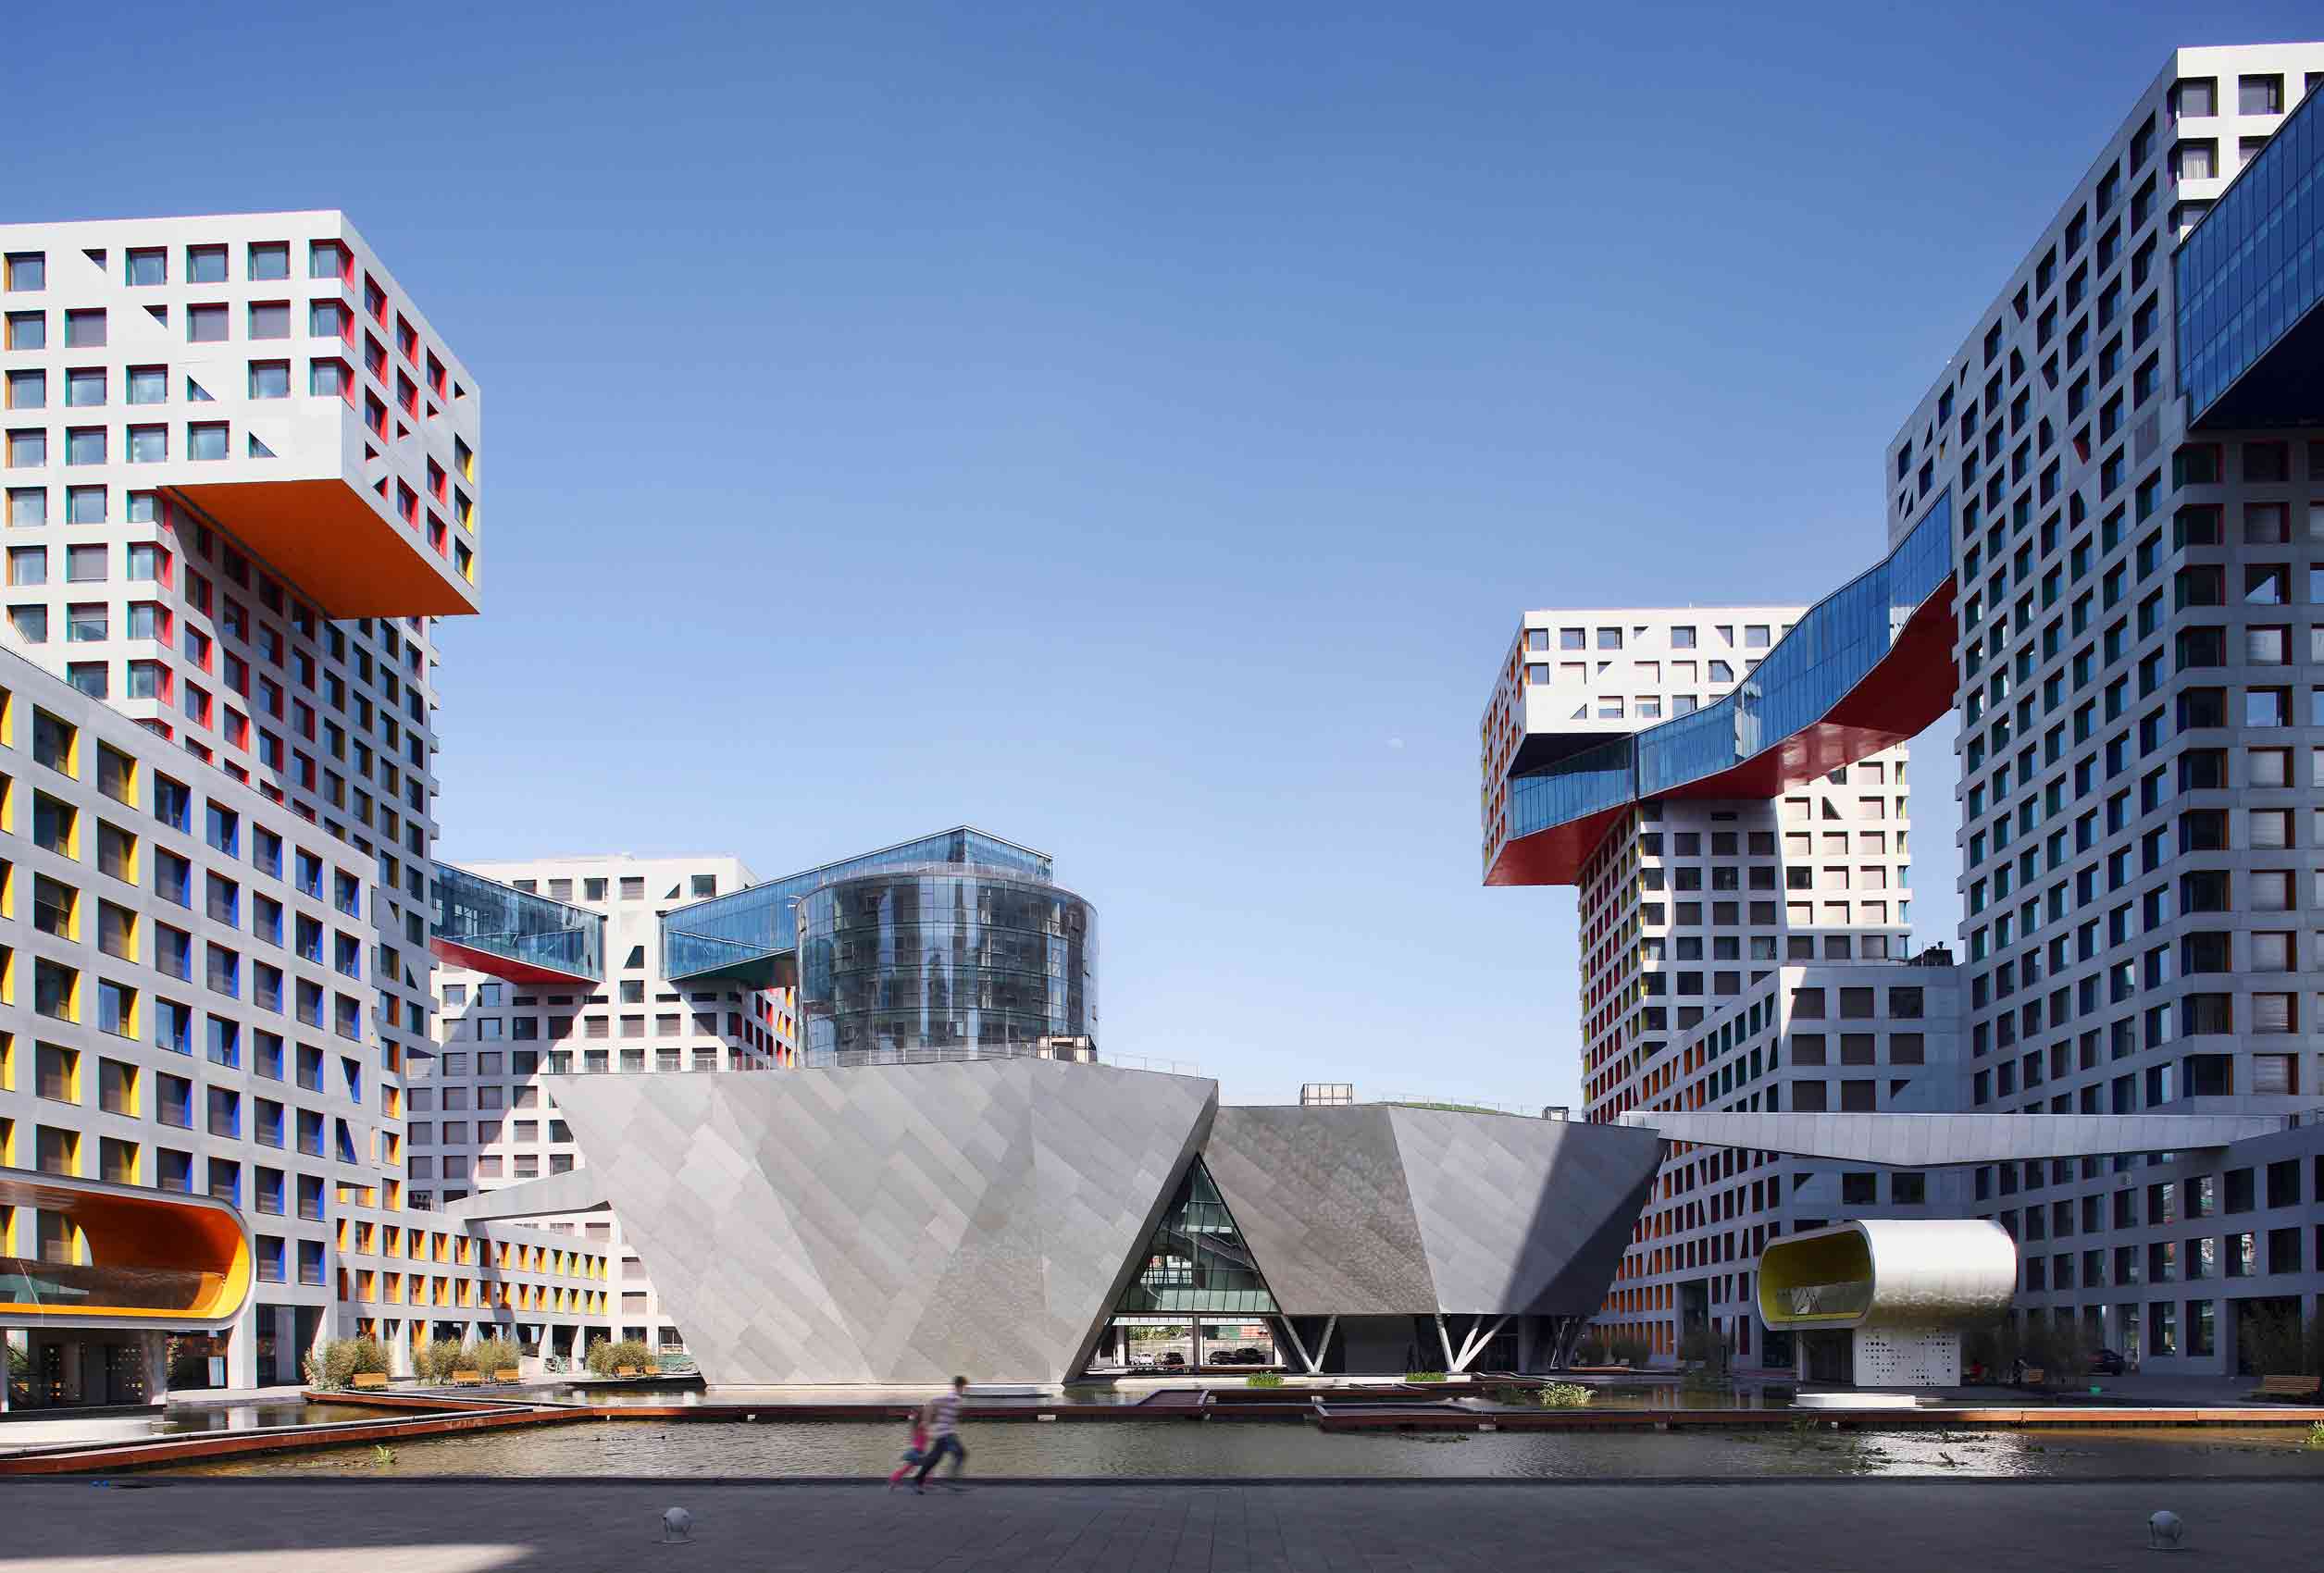 Linked Hybrid by Steven Holl Architects